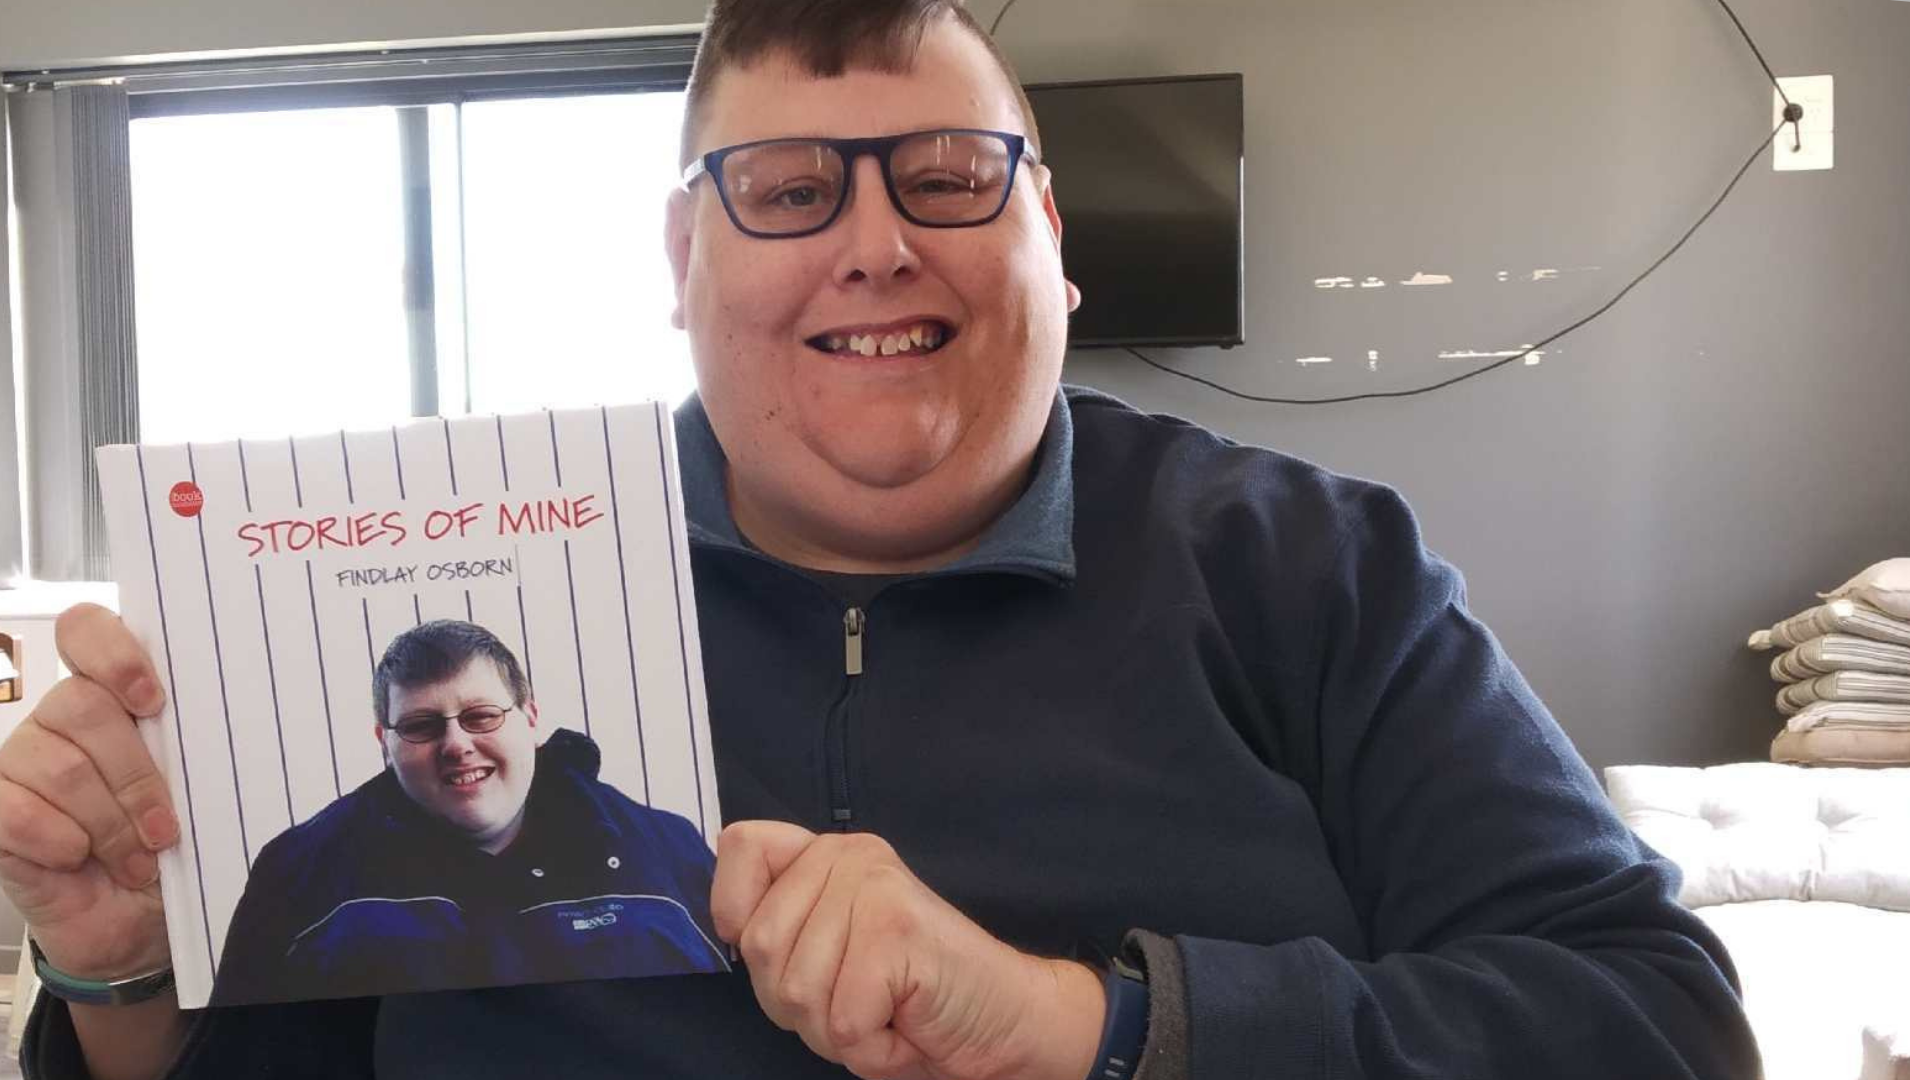 Findlay proudly holding his book, authored by him, about his life